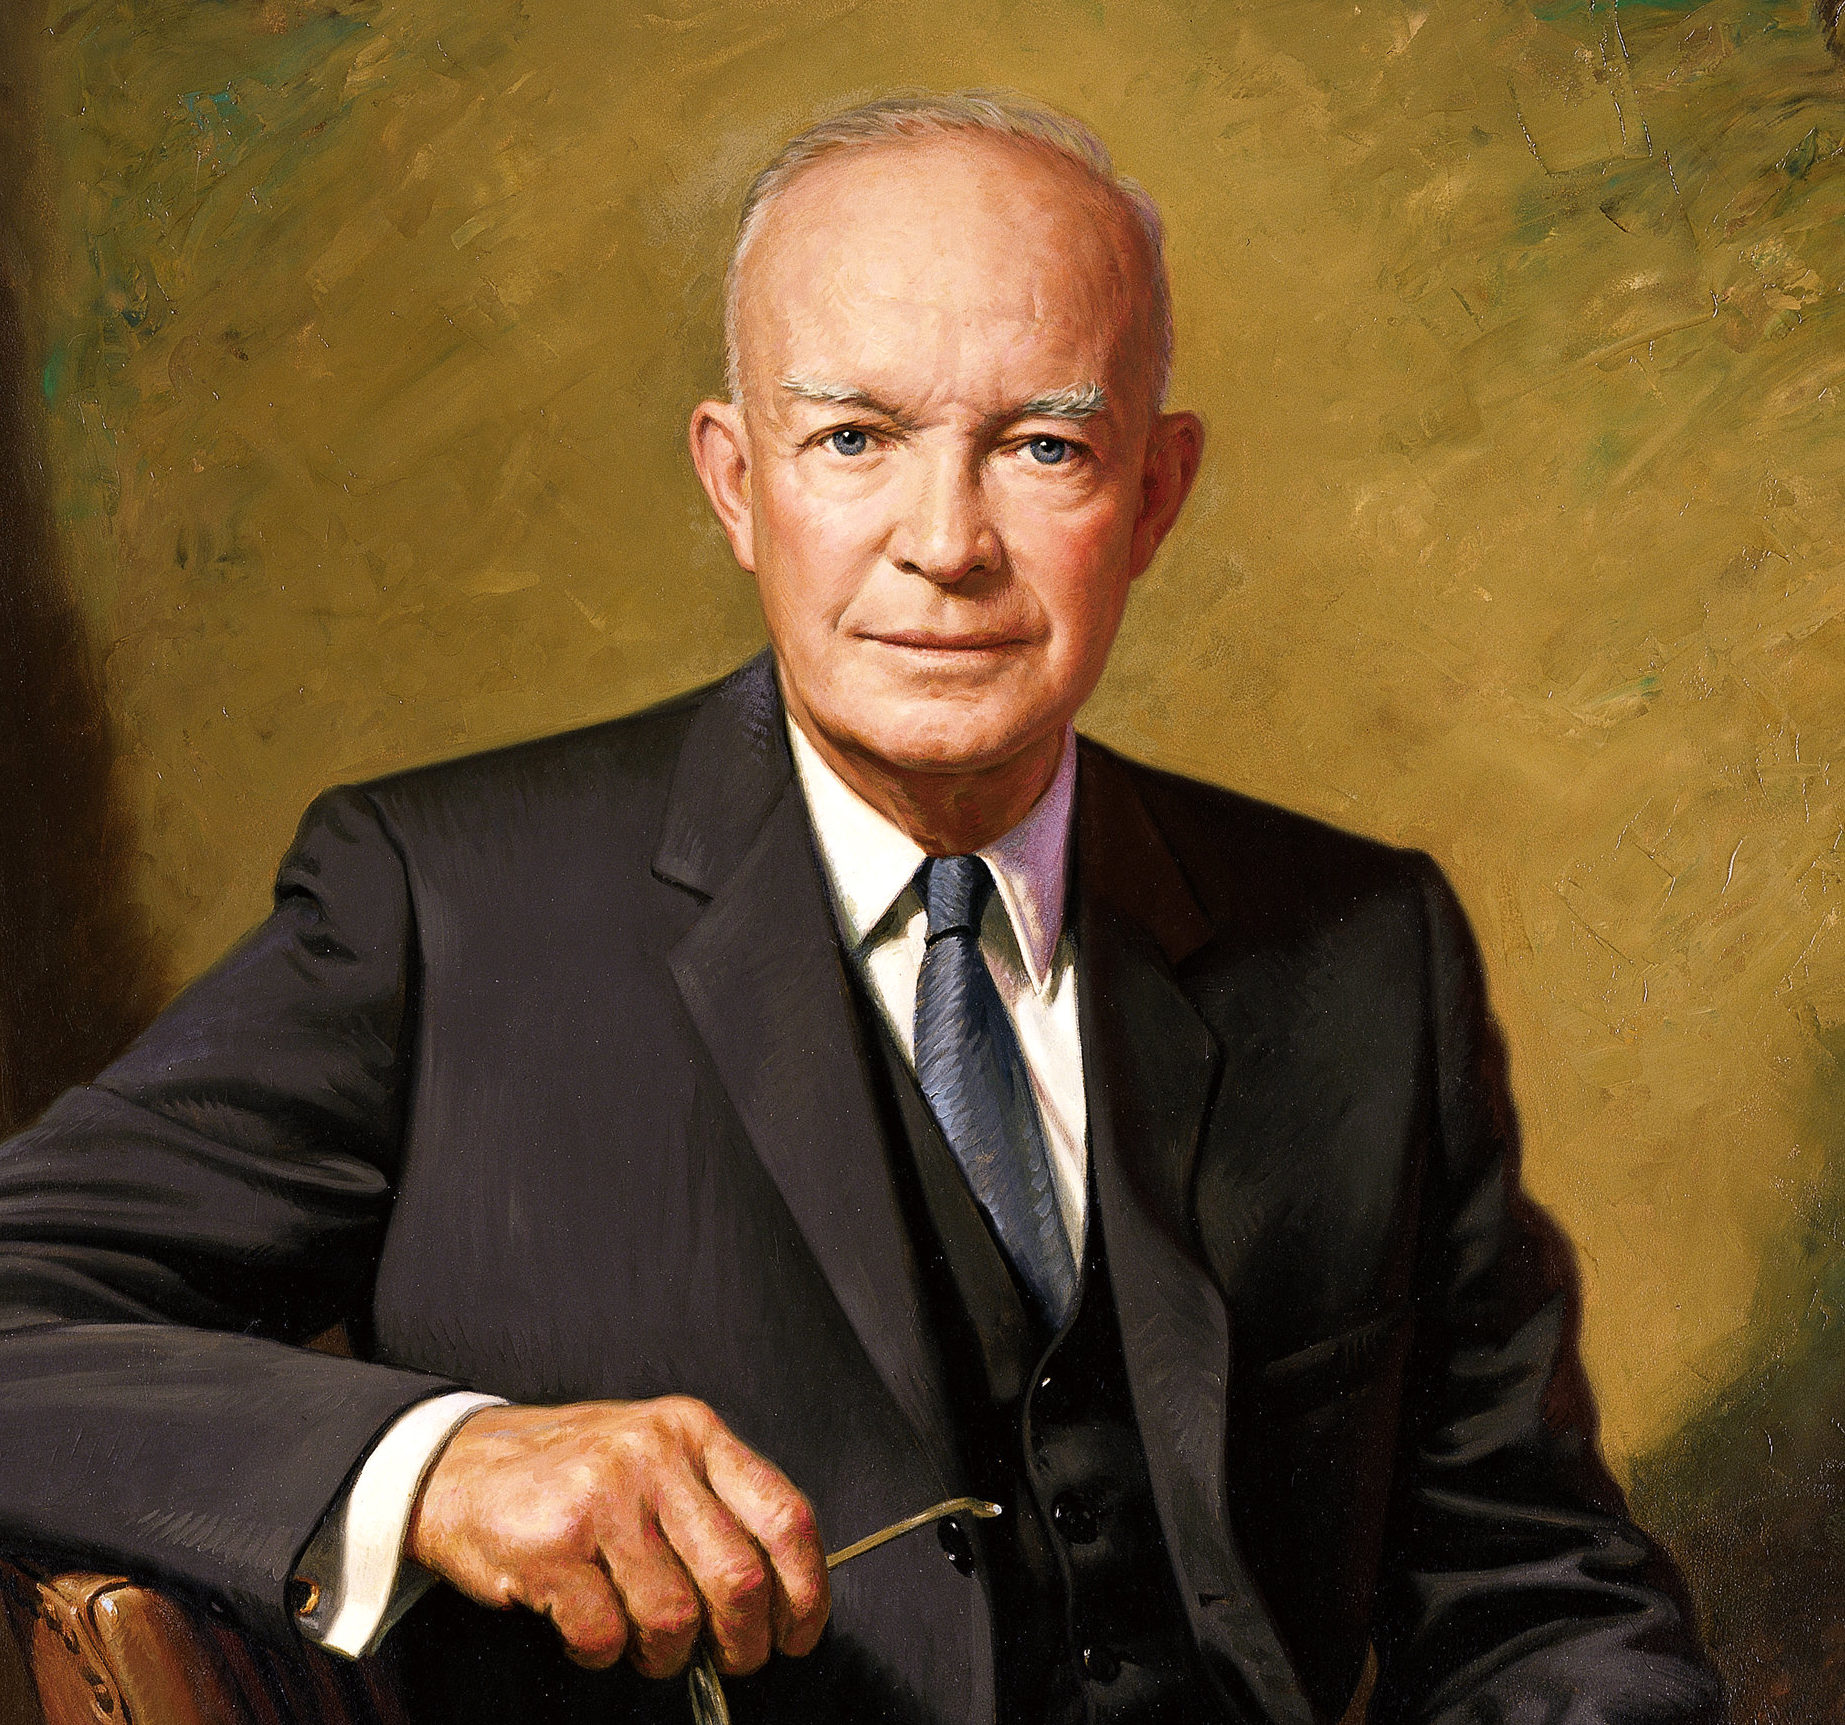 Ike’s Forgotten Legacy on Civil Rights: A Lesson in Leadership for Today